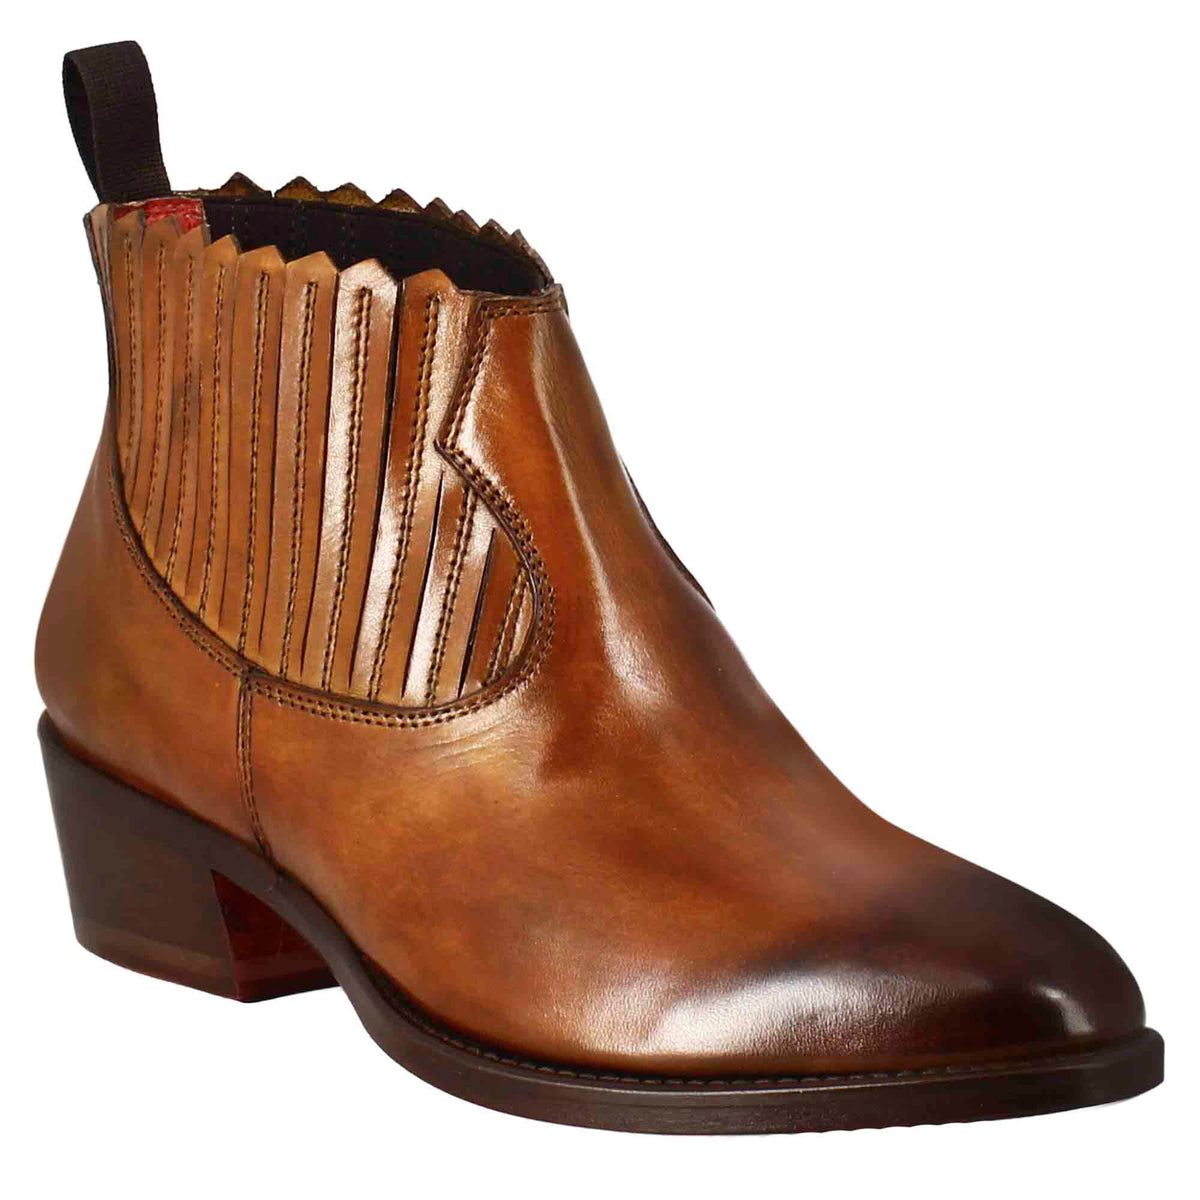 Women's ankle boot with collar cutouts in light brown leather